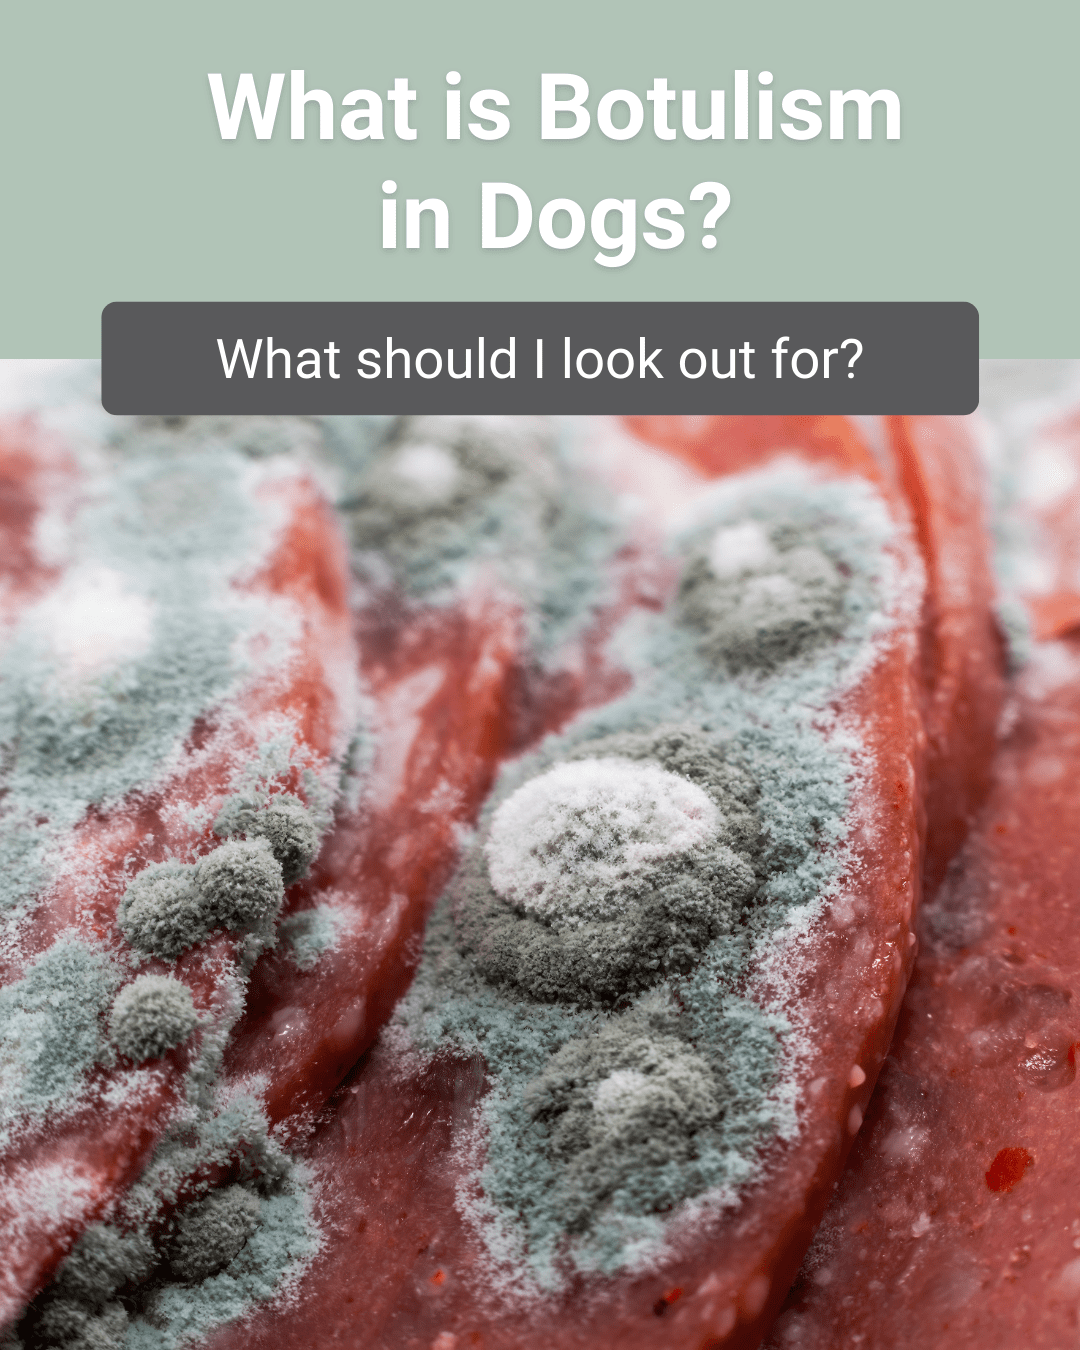 What is Botulism in Dogs and What Should I Look Out For?